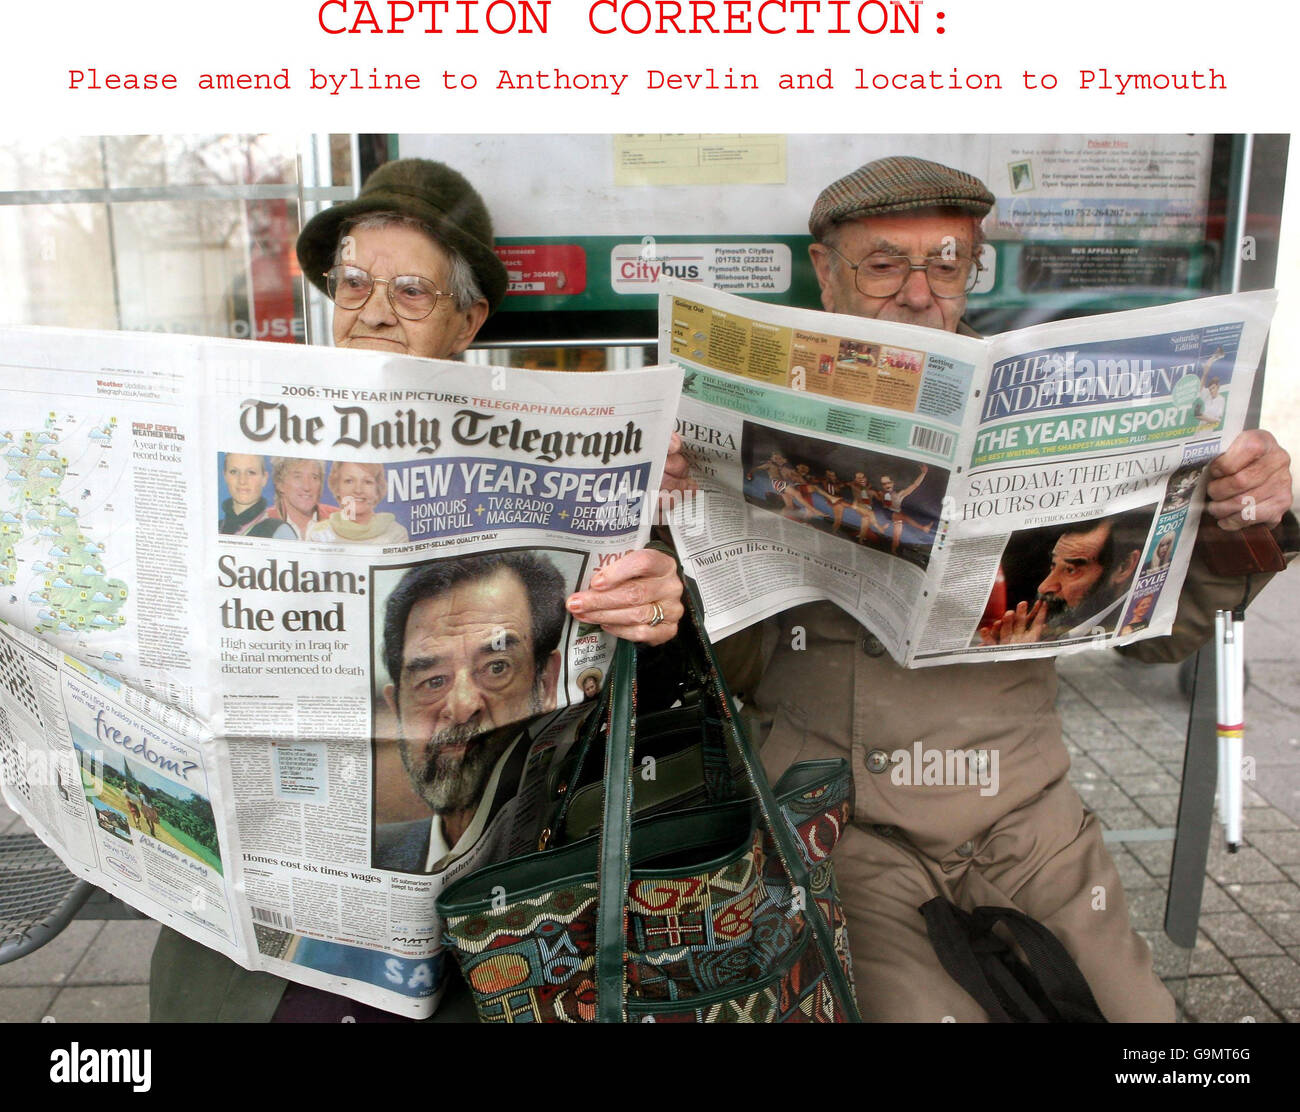 CAPTION CORRECTION. Amended caption should read: Members of the public in Plymouth read the news that former Iraqi dictator Saddam Hussein was executed at dawn today in Baghdad, Iraq (3am GMT). Stock Photo